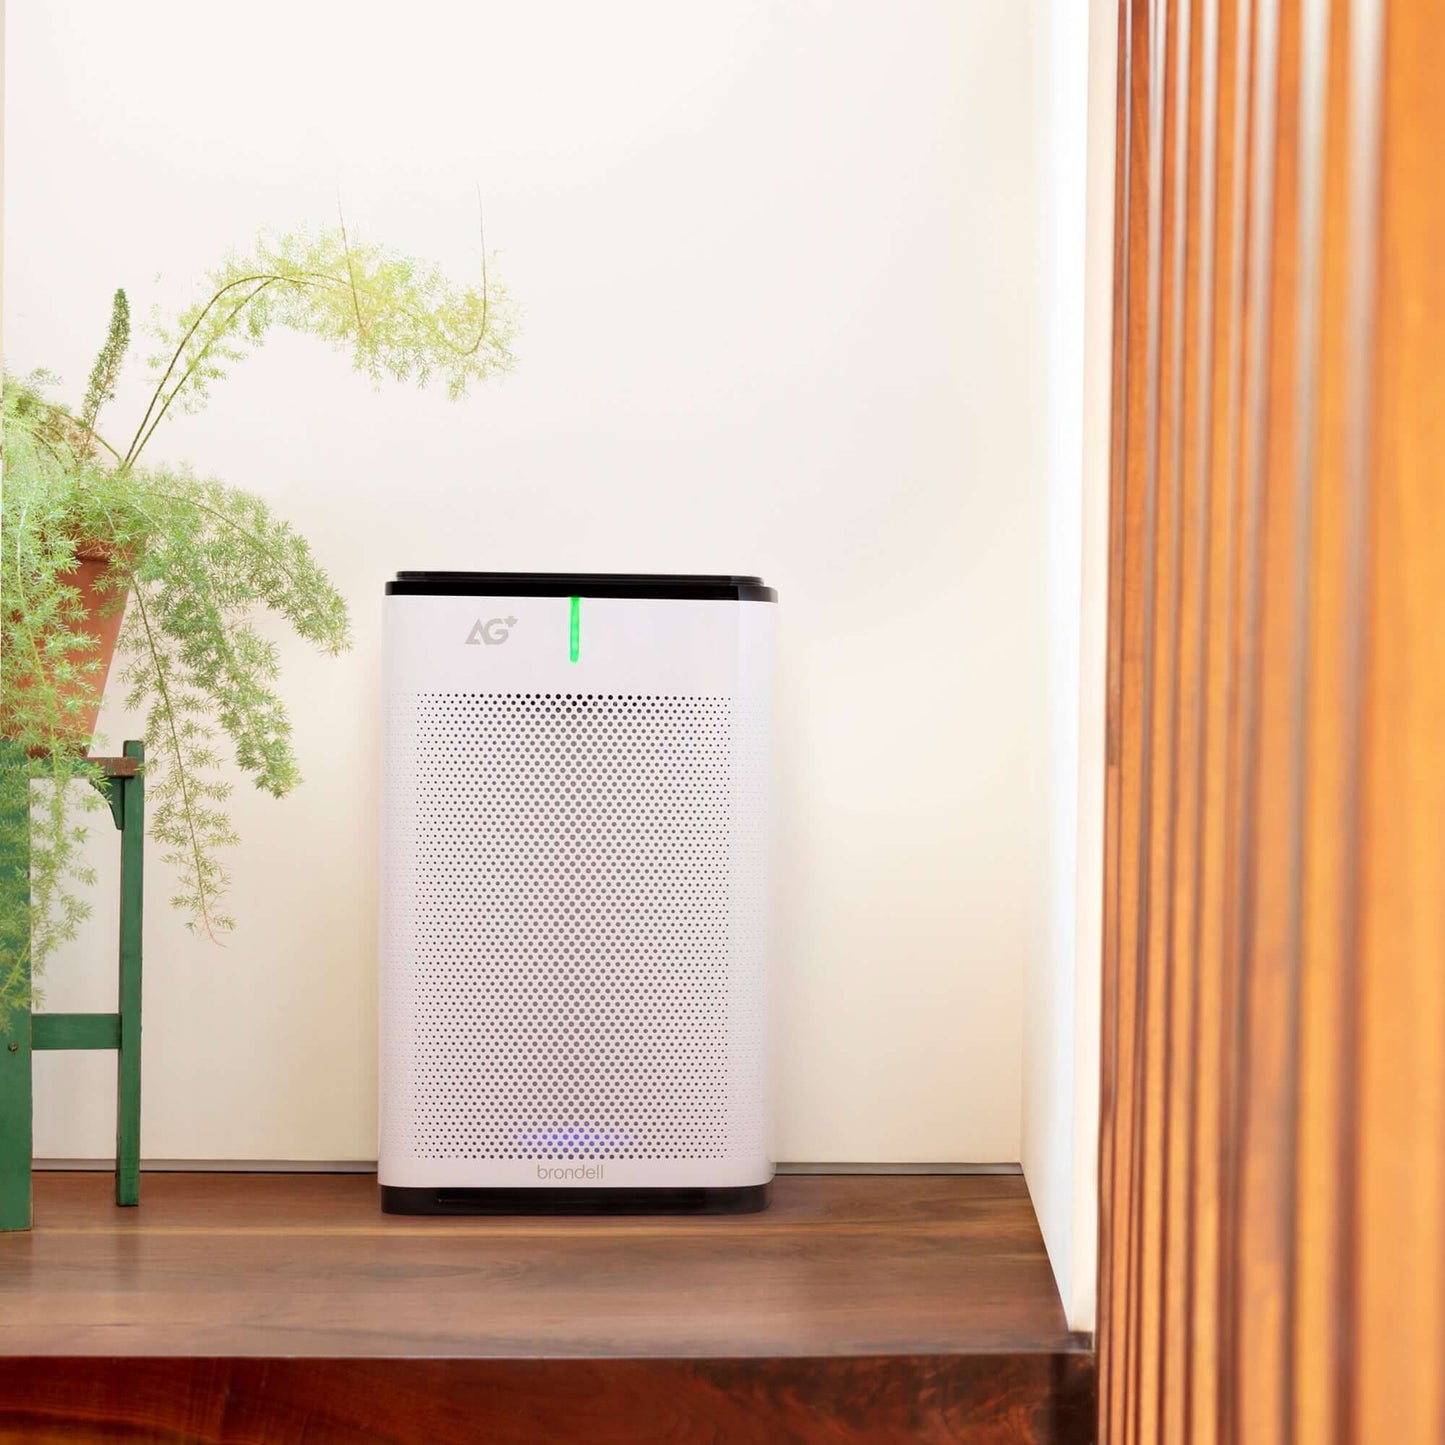 Brondell Pro Sanitizing Air Purifier with AG+ Technology for Purification of SARS-CoV-2, Virus, Bacteria and Allergens - front view in a room by a plant